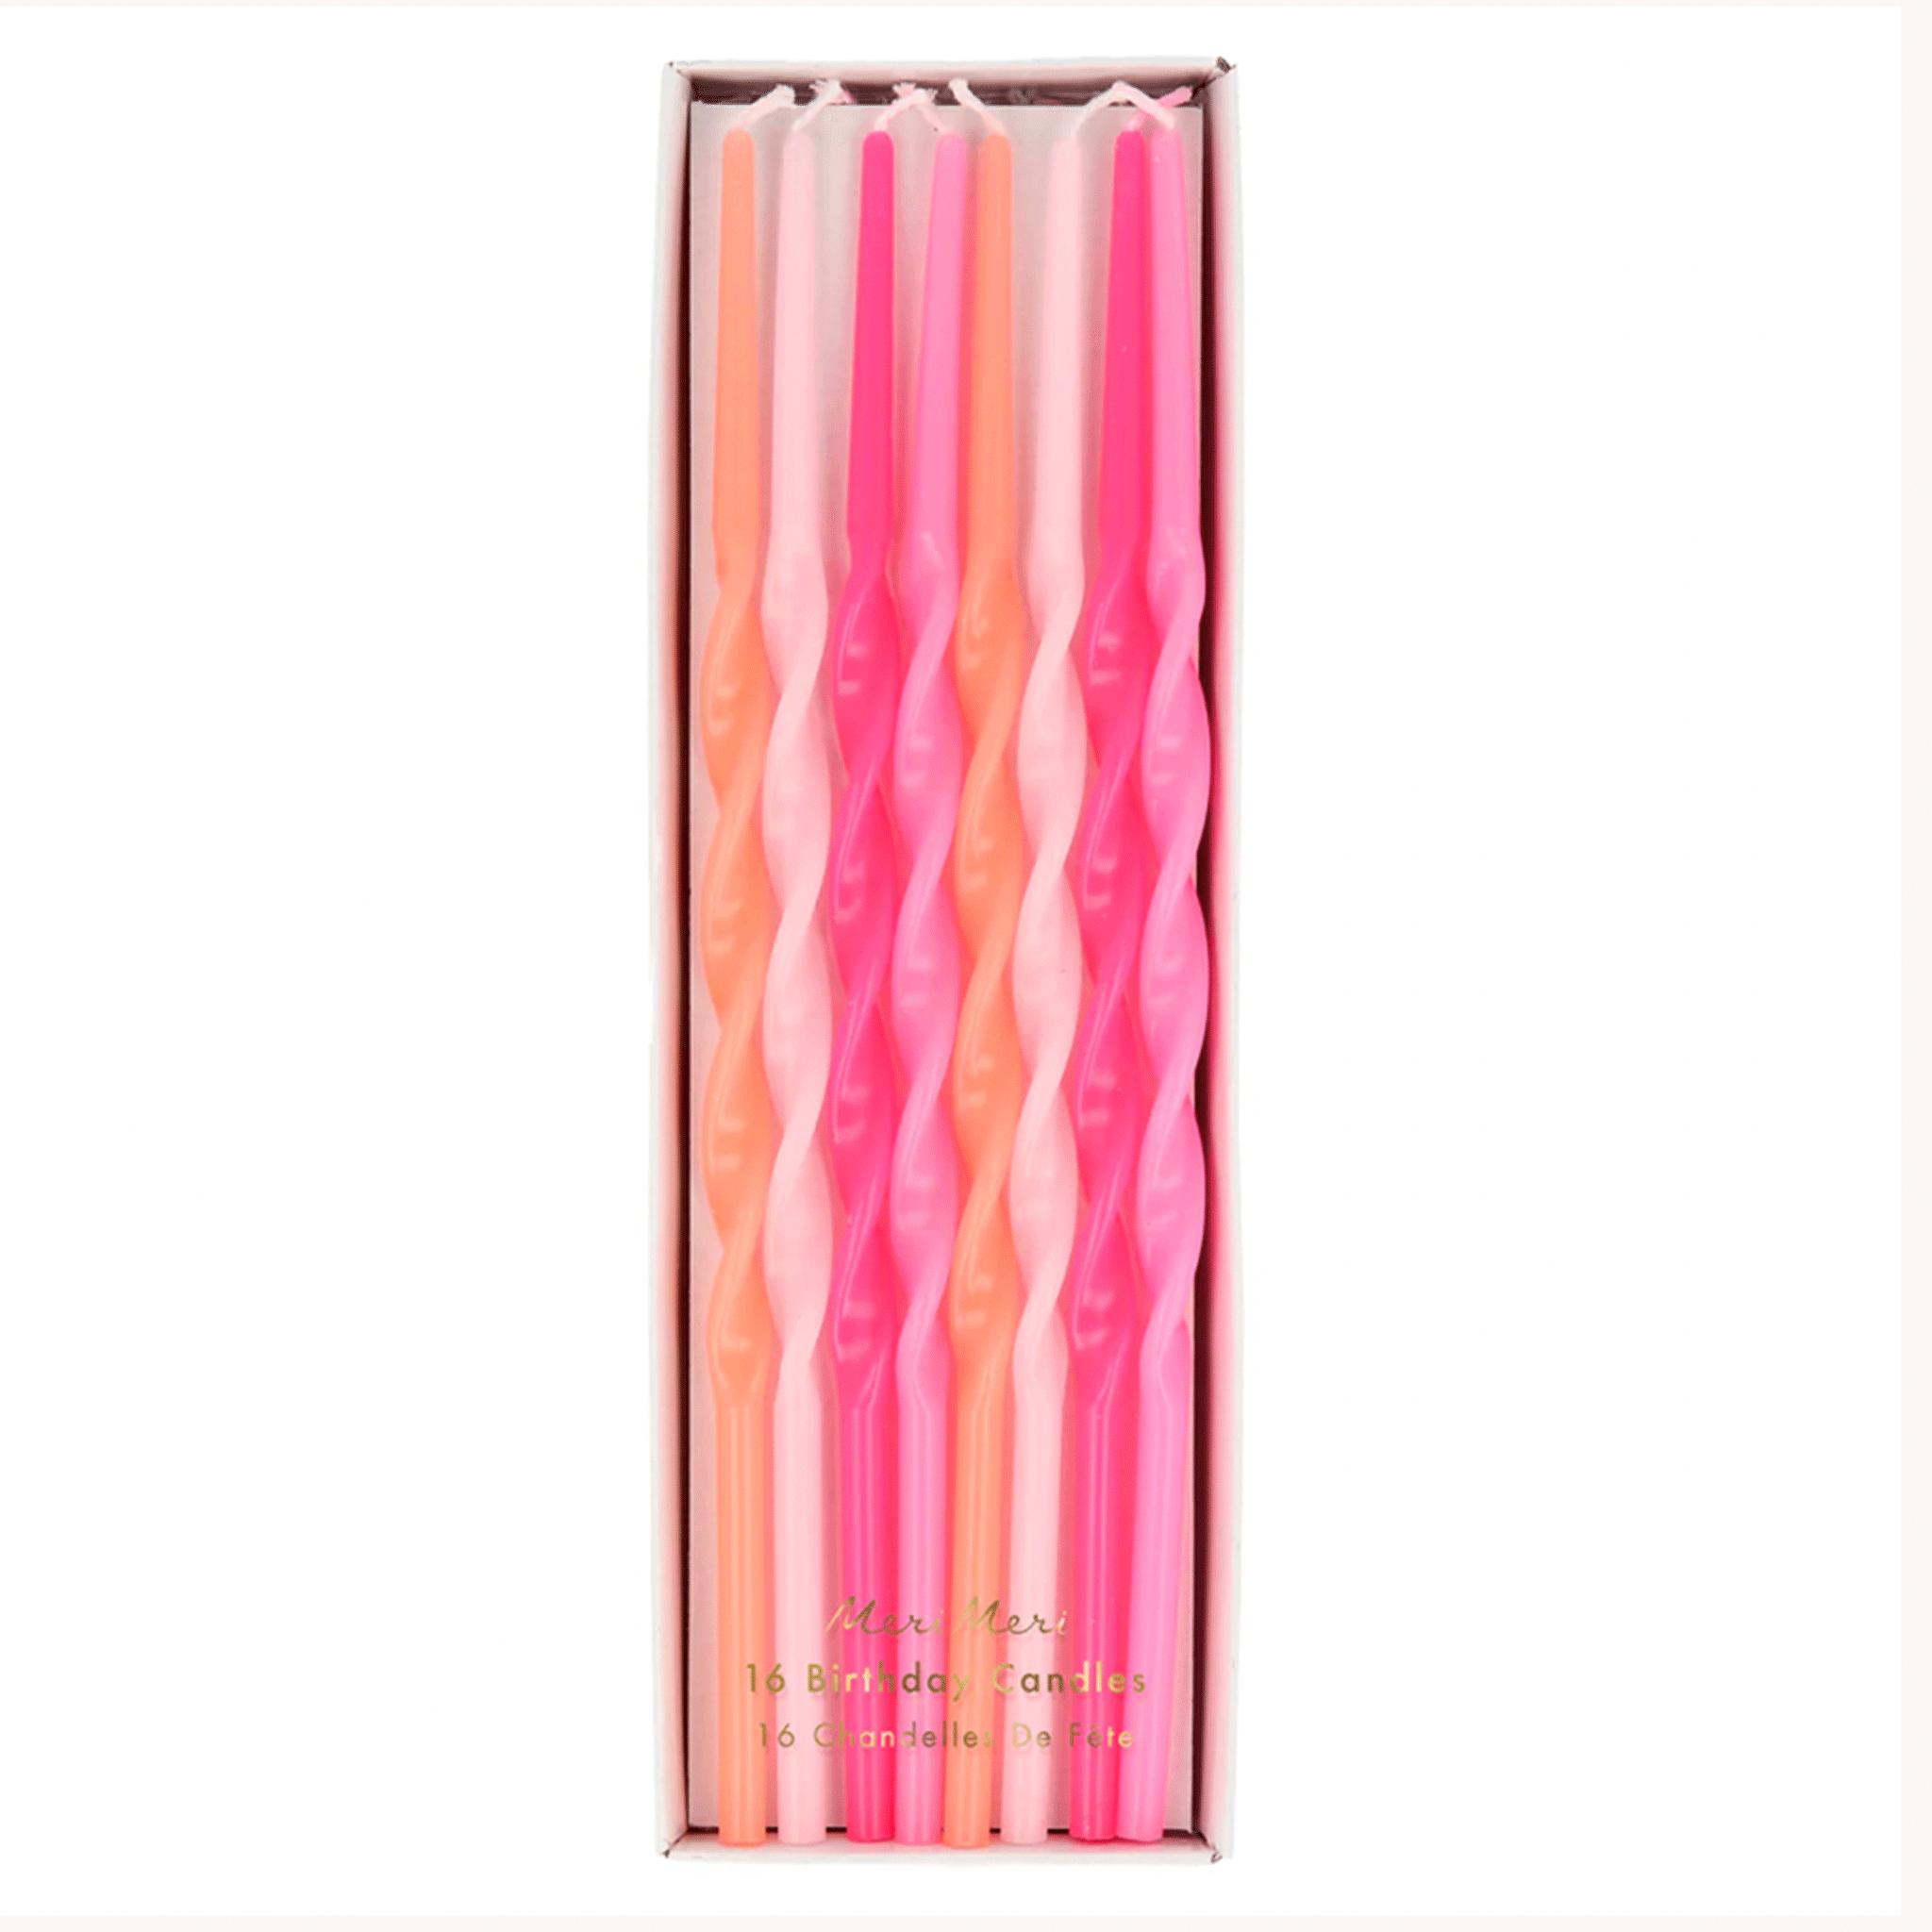 On a white background is a pack of long pink twisted candles in a variety of pink shades. 